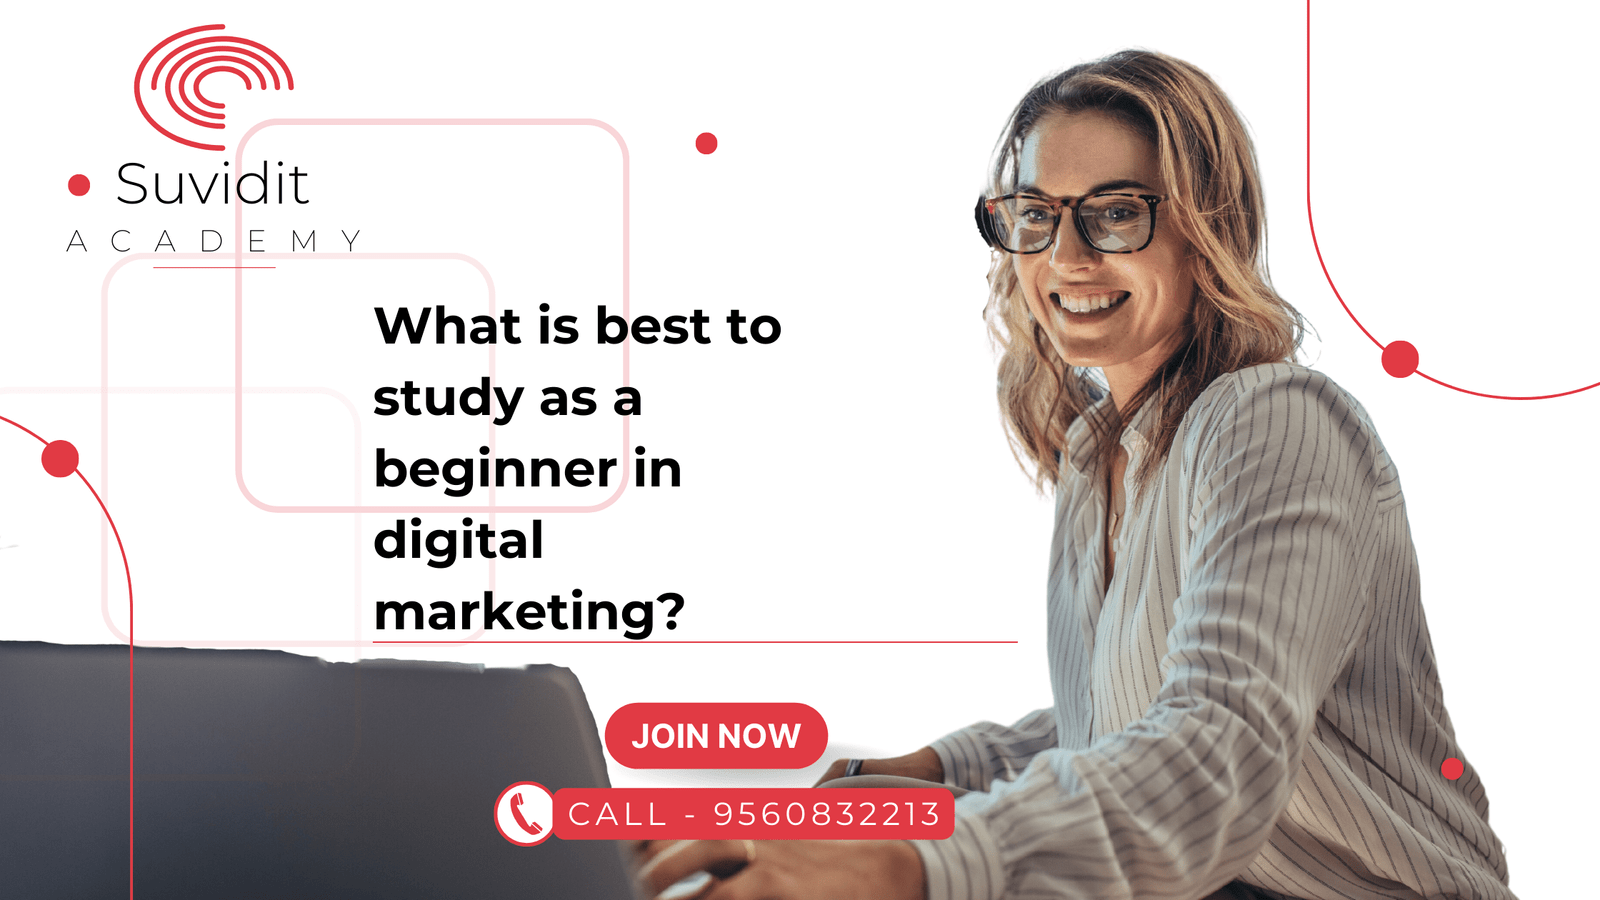 What is best to study as a beginner in digital marketing